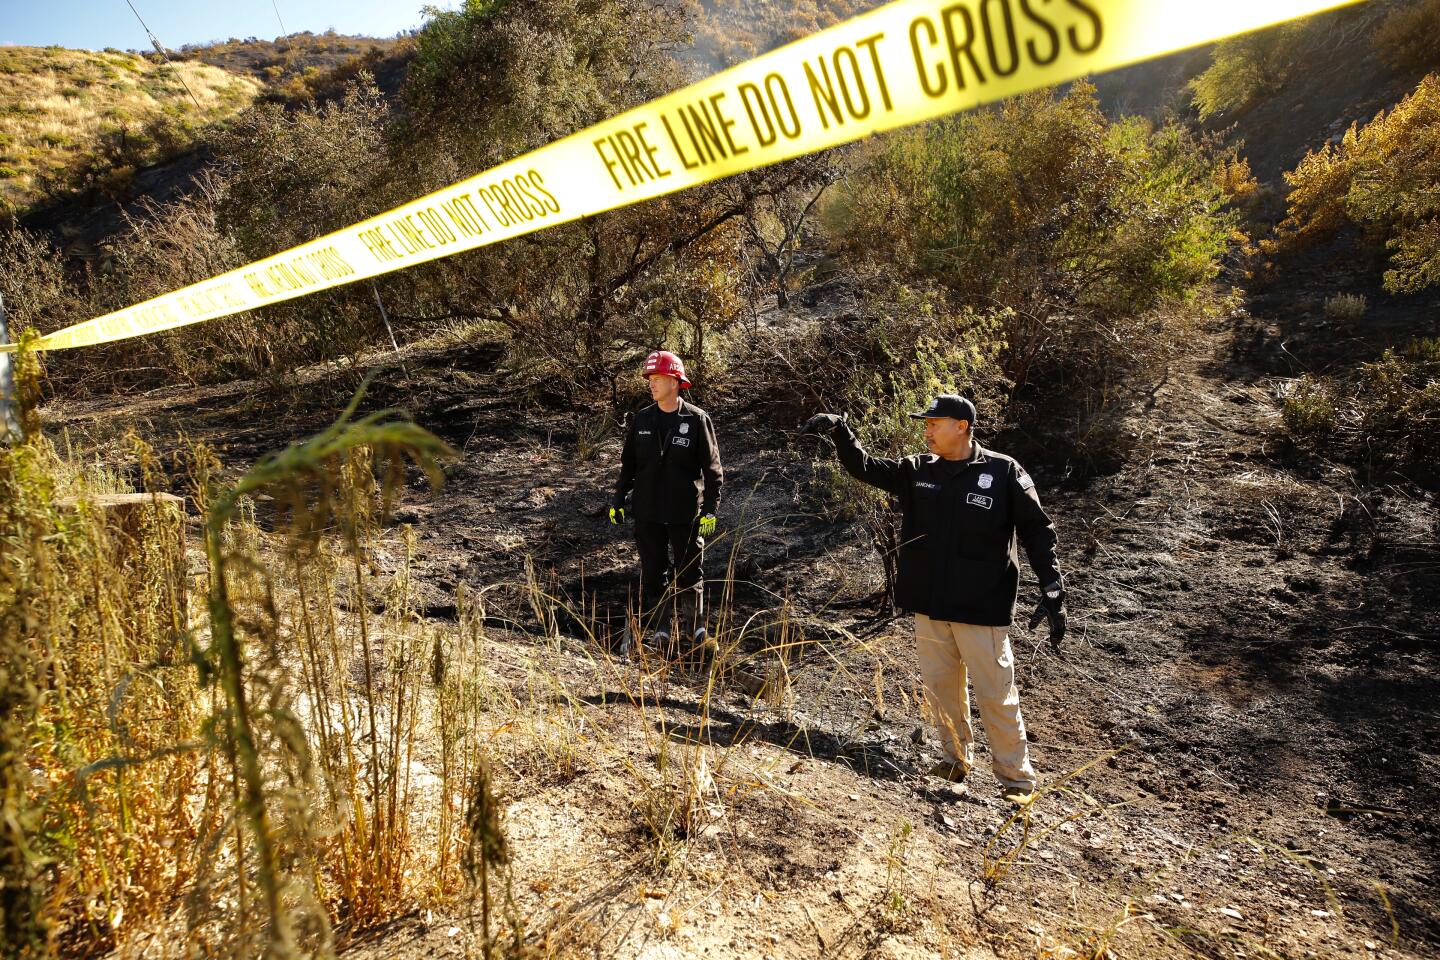 Los Angeles CA. JUNE 10, 2020 - LAFD Arson investigators Robert Williams, left, and Joe Sanchez investigate the origin of the brush fire that broke out after midnight in the Sepulveda Pass threatening homes of Bel Air Wednesday, June 10, 2020. Firefighters were able to stop forward movement of the blaze at about 50 acres. (Al Seib / Los Angeles Times)